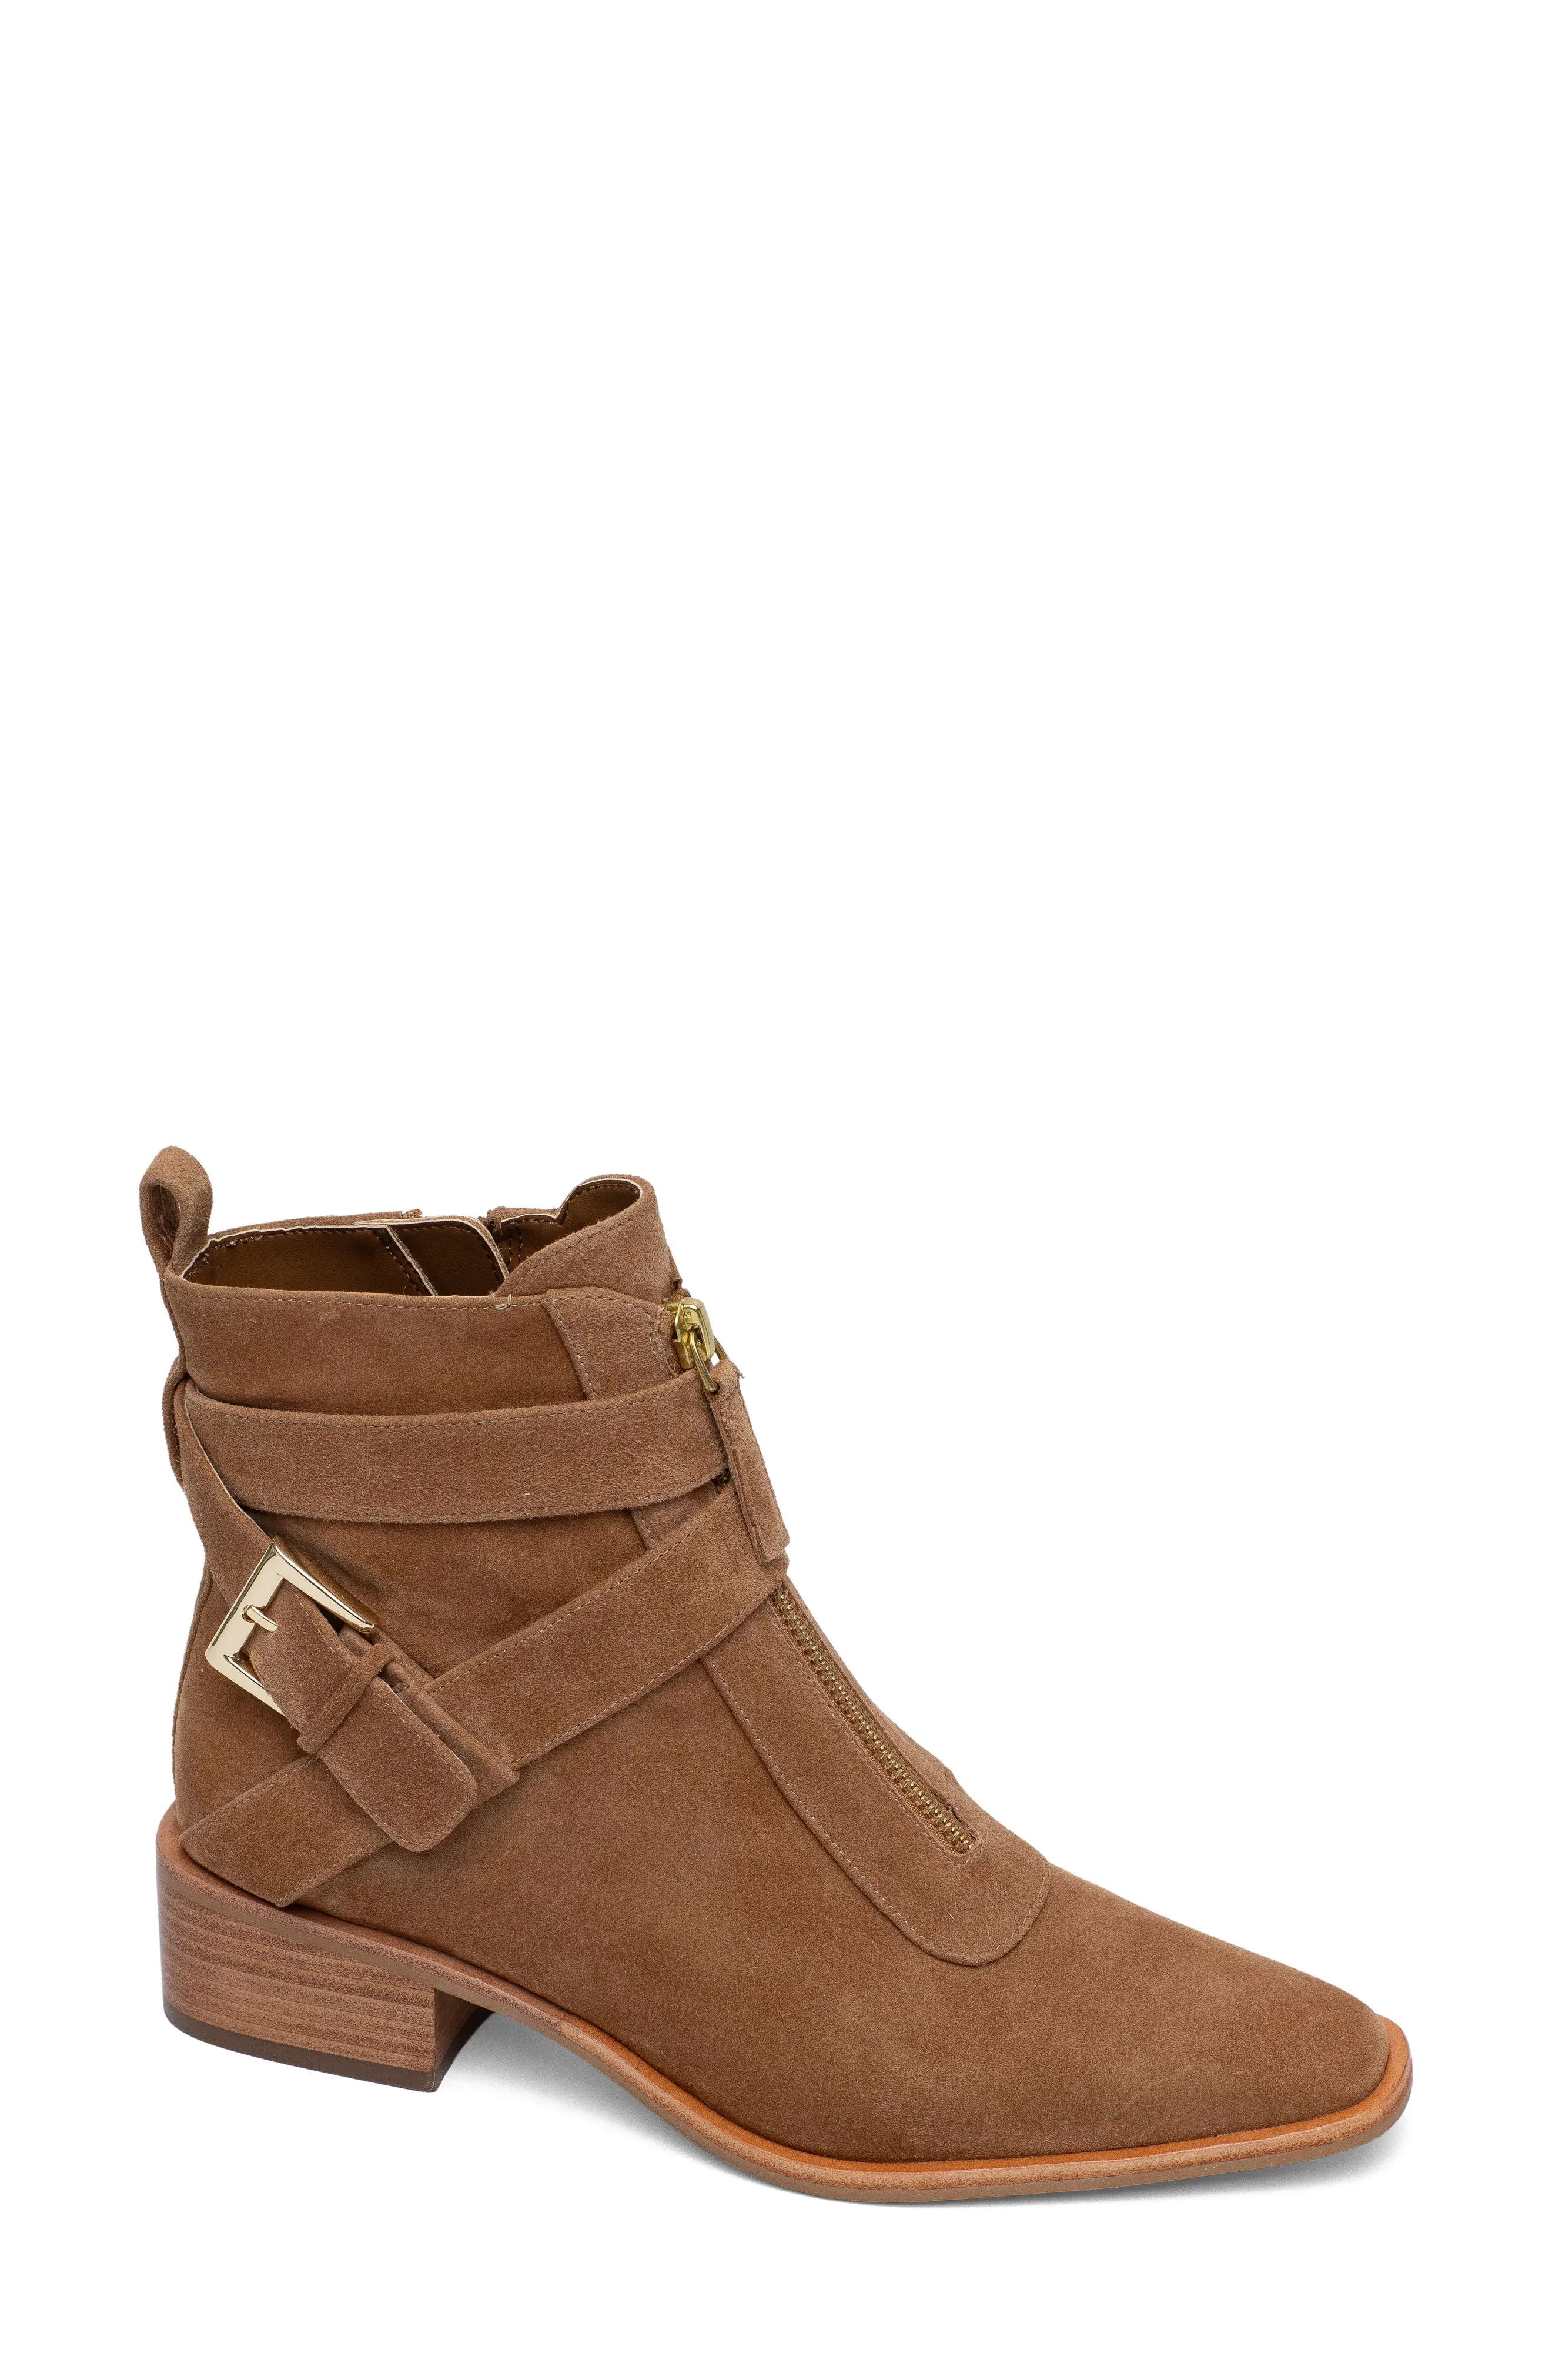 Linea Paolo Valona Leather Boot, Size 4 in Whiskey at Nordstrom | Nordstrom